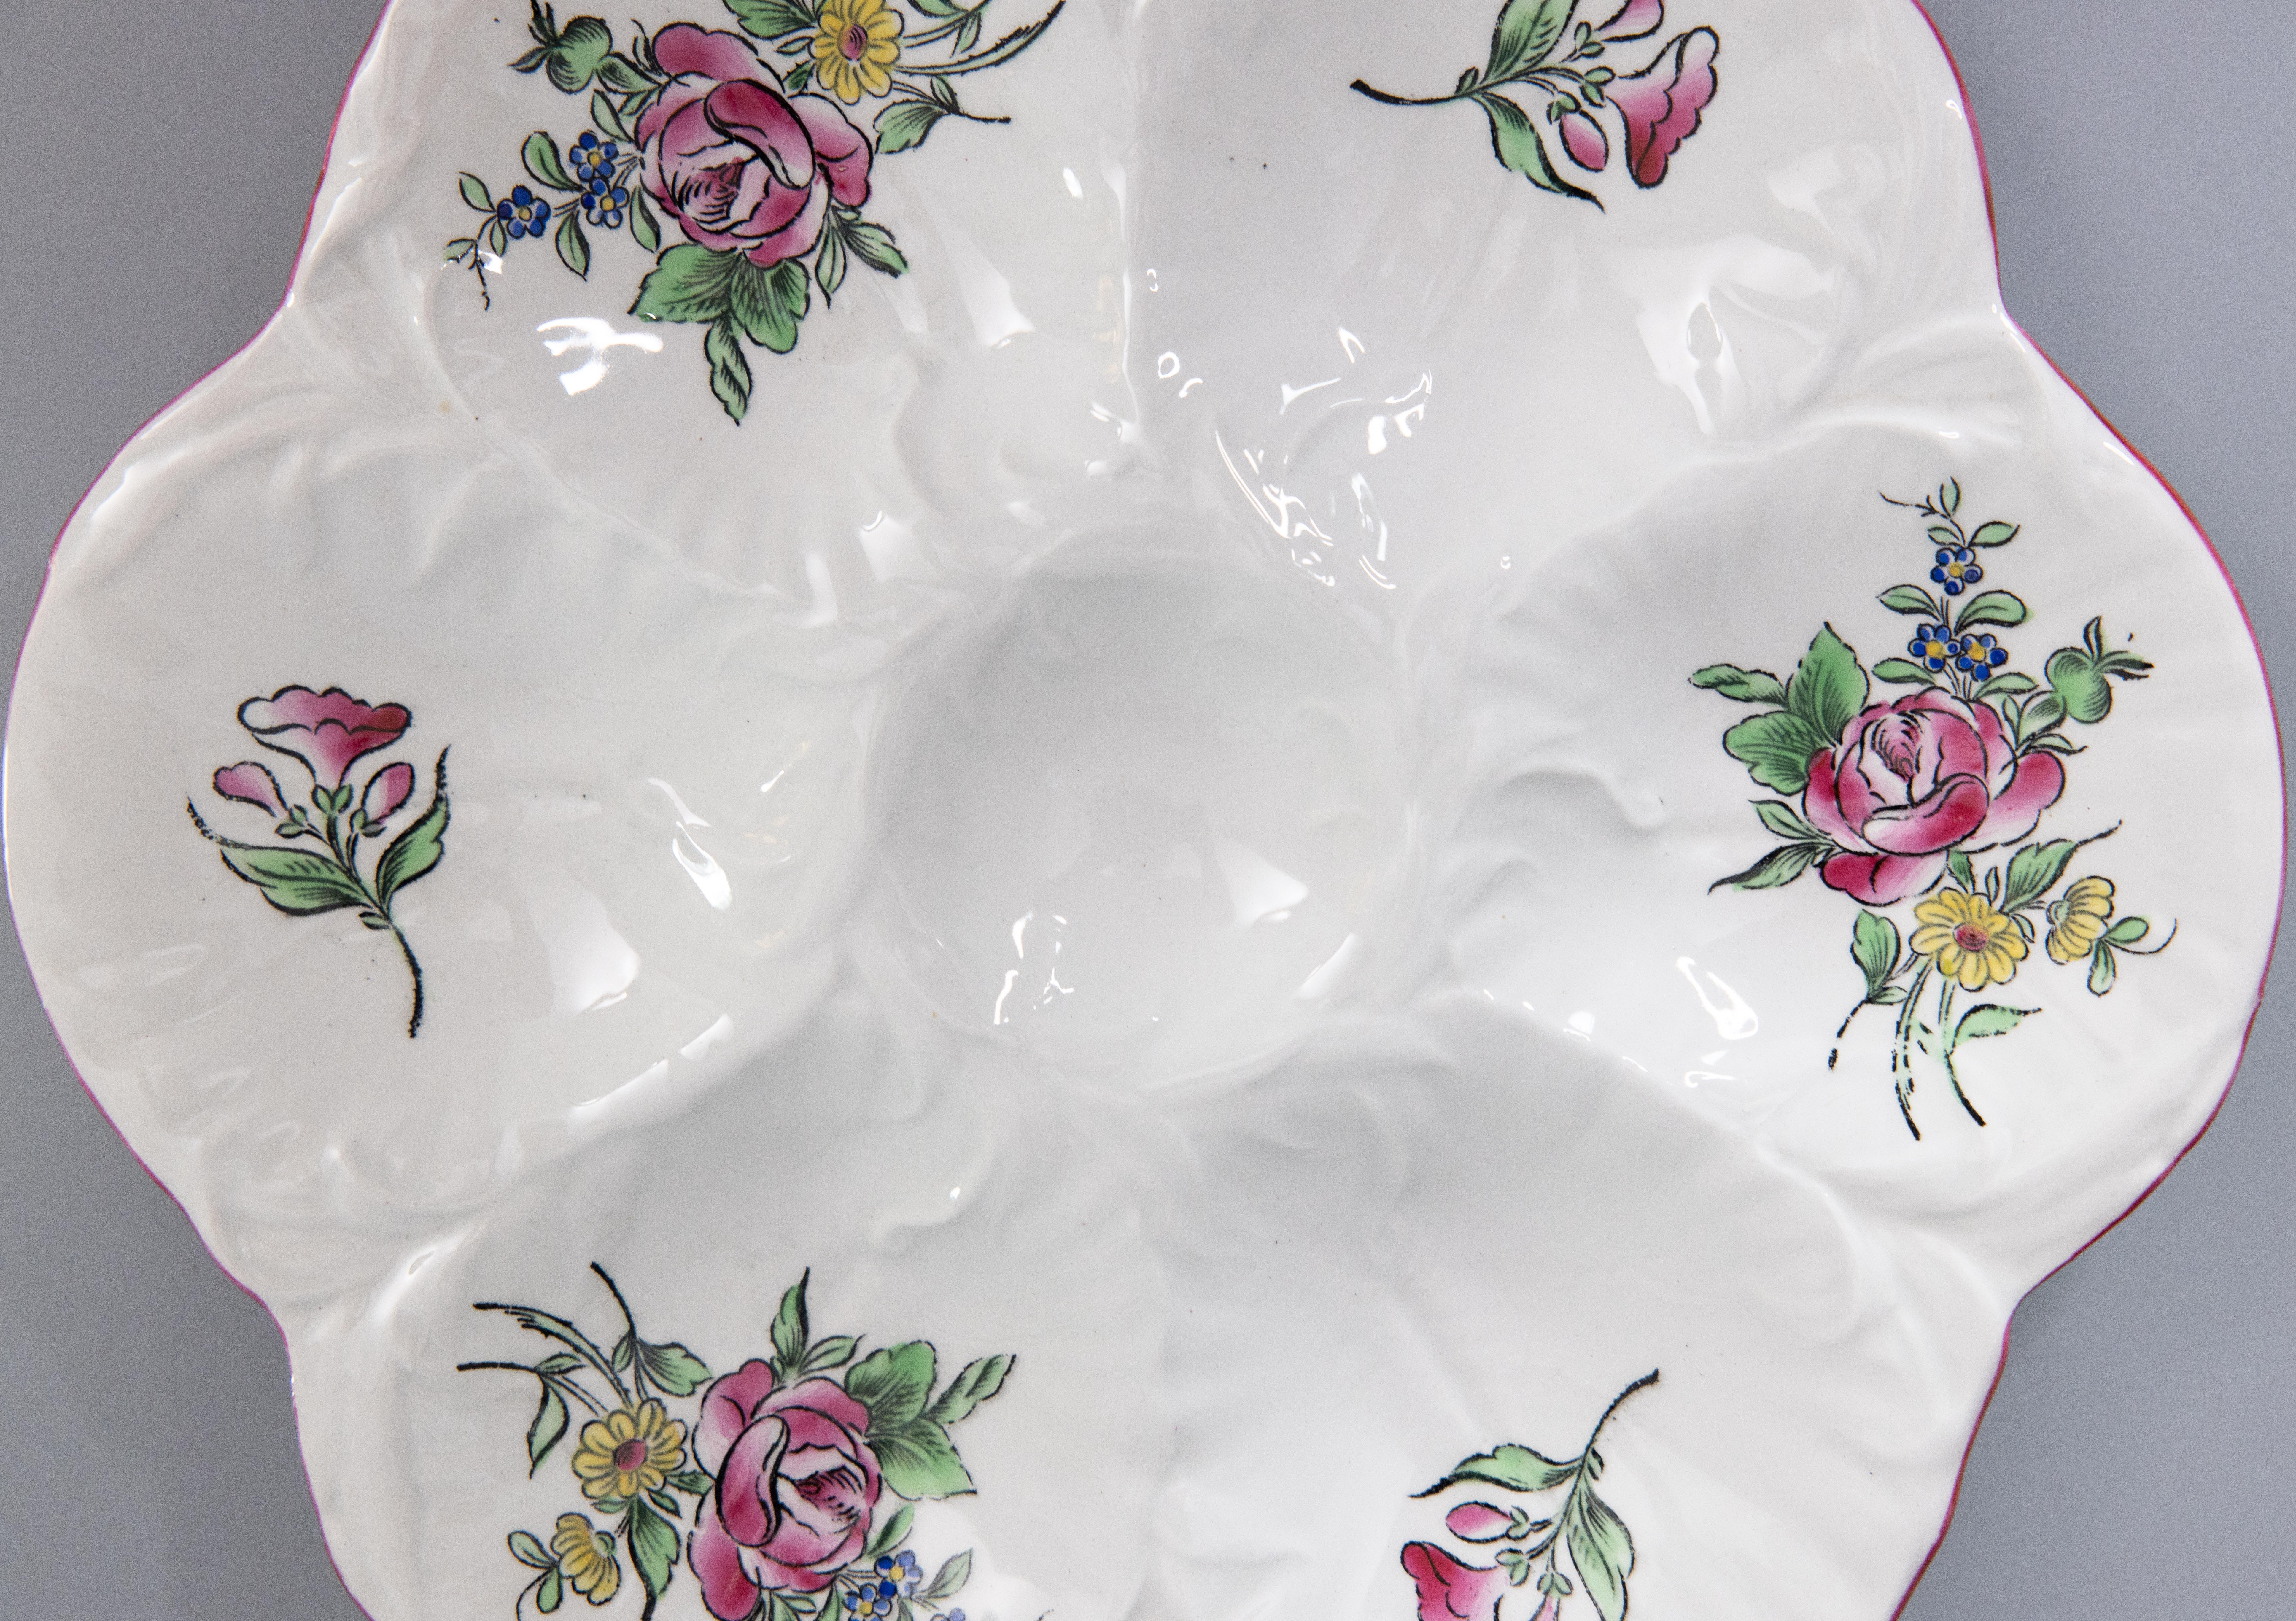 A gorgeous antique French Majolica floral porcelain oyster plate by Keller & Guérin made in Luneville, France, circa 1900. Maker's mark on the reverse. This fine quality oyster plate is hand painted in the Old Strasbourg porcelain pattern with